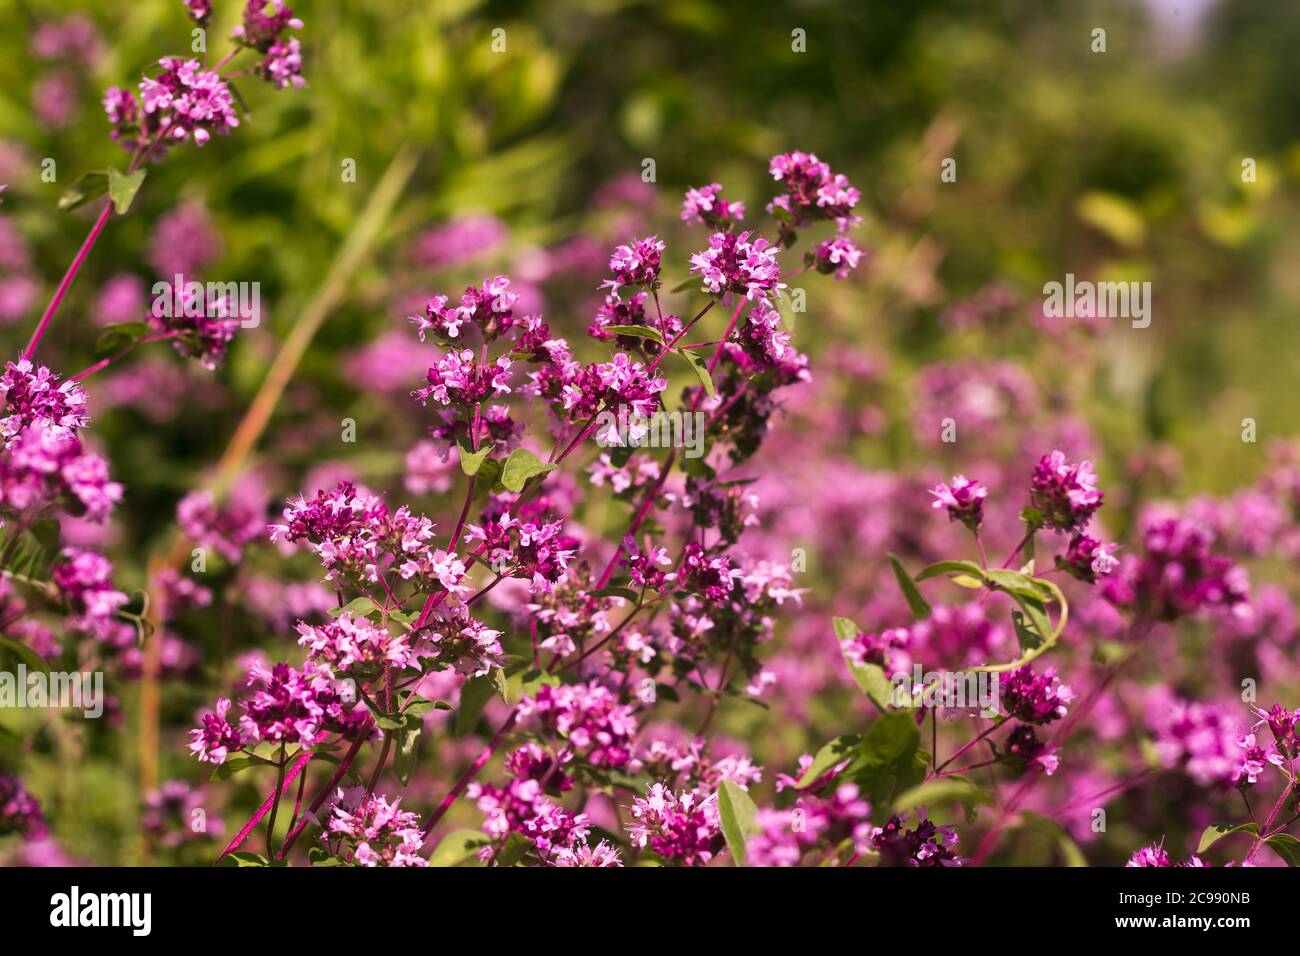 Origanum close up is a genus of herbaceous perennials and subshrubs in the family Lamiaceae on a blurry background Stock Photo